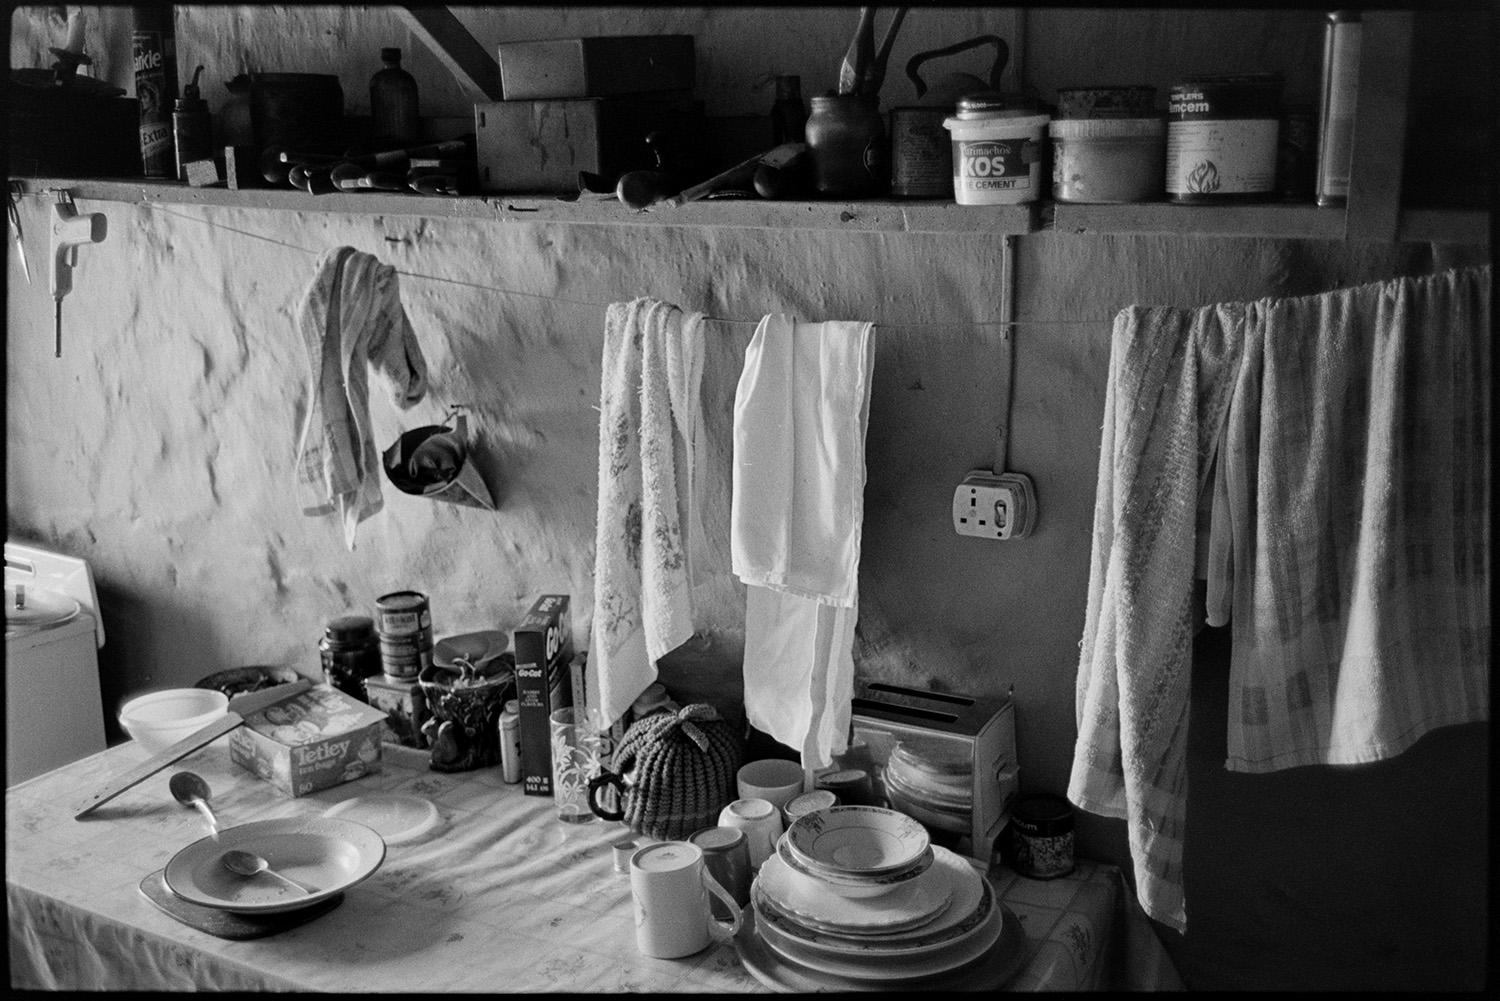 Kitchen sideboard with plates, toaster, teapot and towels.
[The kitchen at Bottreaux Mill, Molland. A table with a toaster, crockery, teapot and groceries on it is visible. Tea towels are hung up to dry over the table and a shelf with various containers and bottles is above the table.]